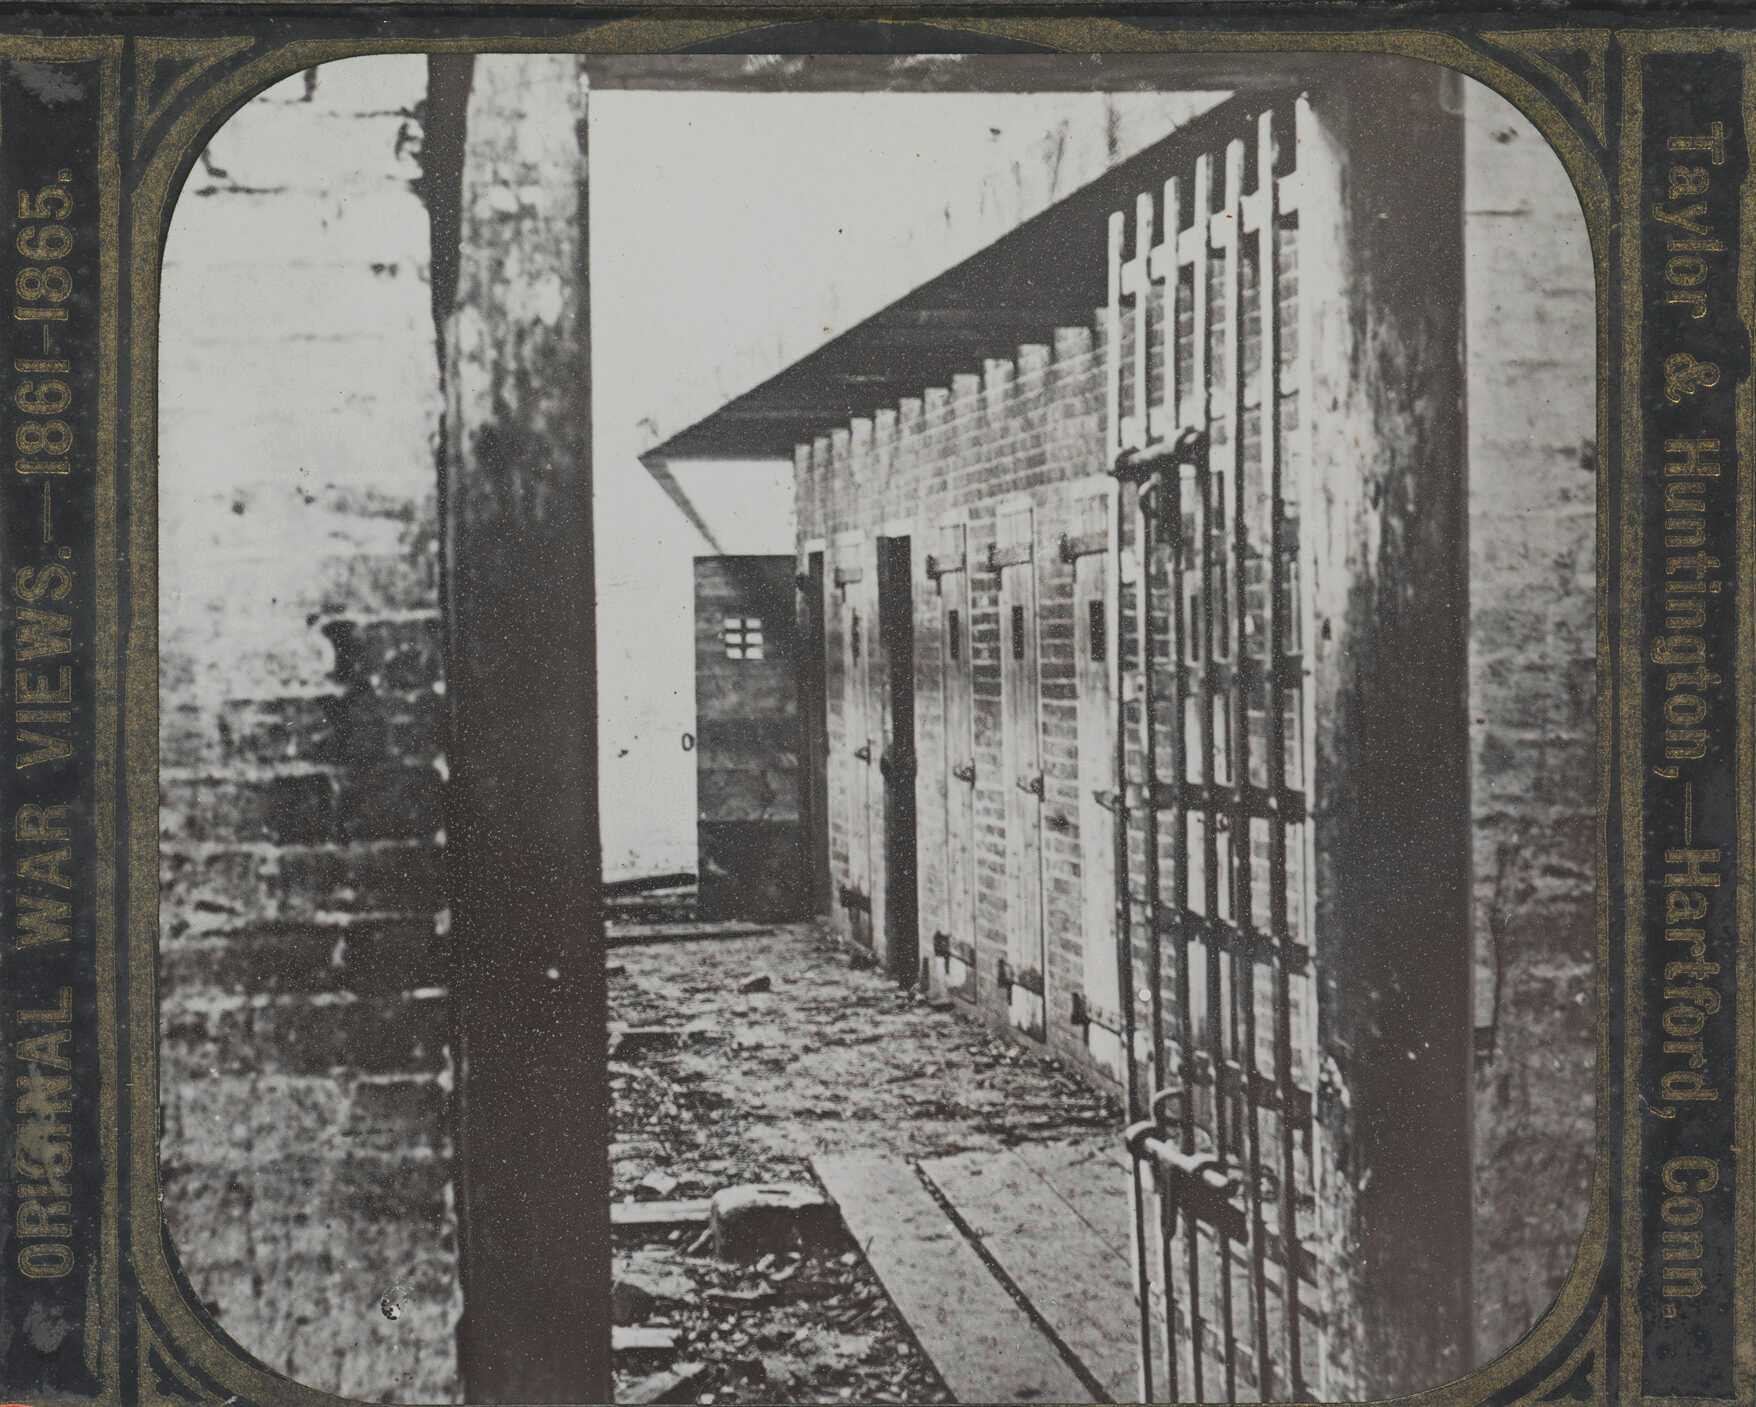 A glass lantern slide of a slave pen on the property of slave dealers Price, Birch & Company, where enslaved persons would be held until auction. The image depicts the view through the outer gate into interior of a slave pen. To the left, a building with a series of narrow doors, each with a small barred window. The printed slide casing reads [ORIGINAL WAR VIEWS 1861-1865.] along the left side and [Taylor & Huntington, - Hartford, Conn.] on the right.